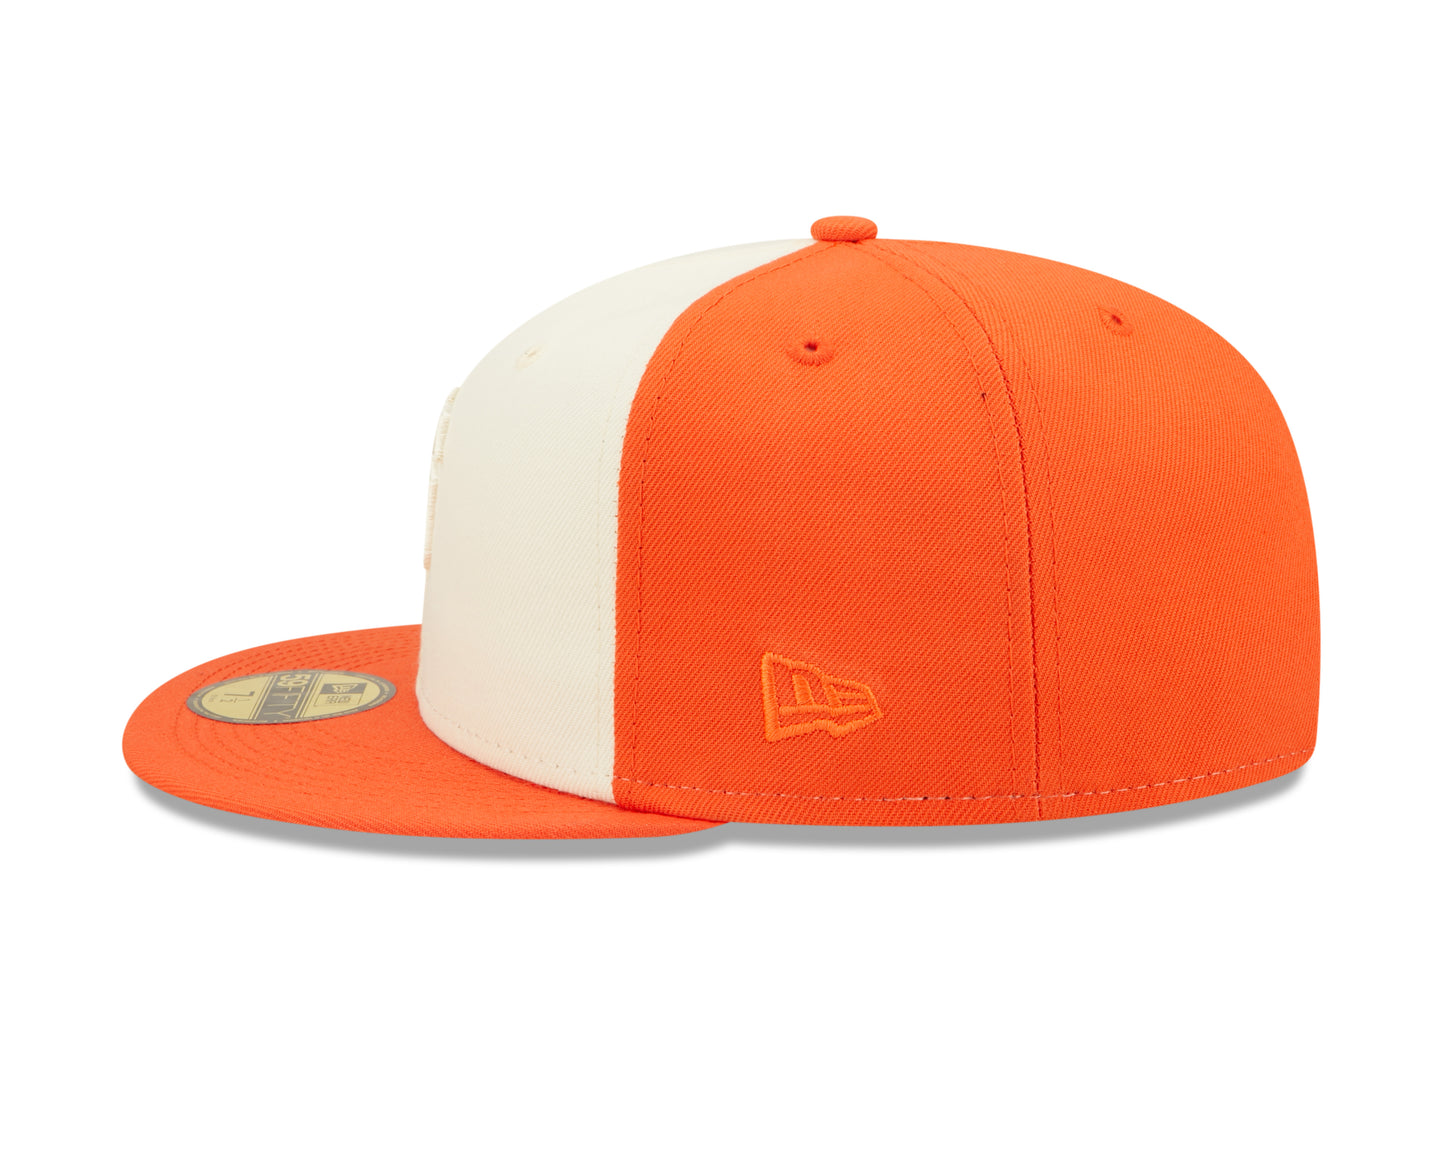 San Francisco Giants World Serise Tonal 2-tone 59fifty Fitted Hat